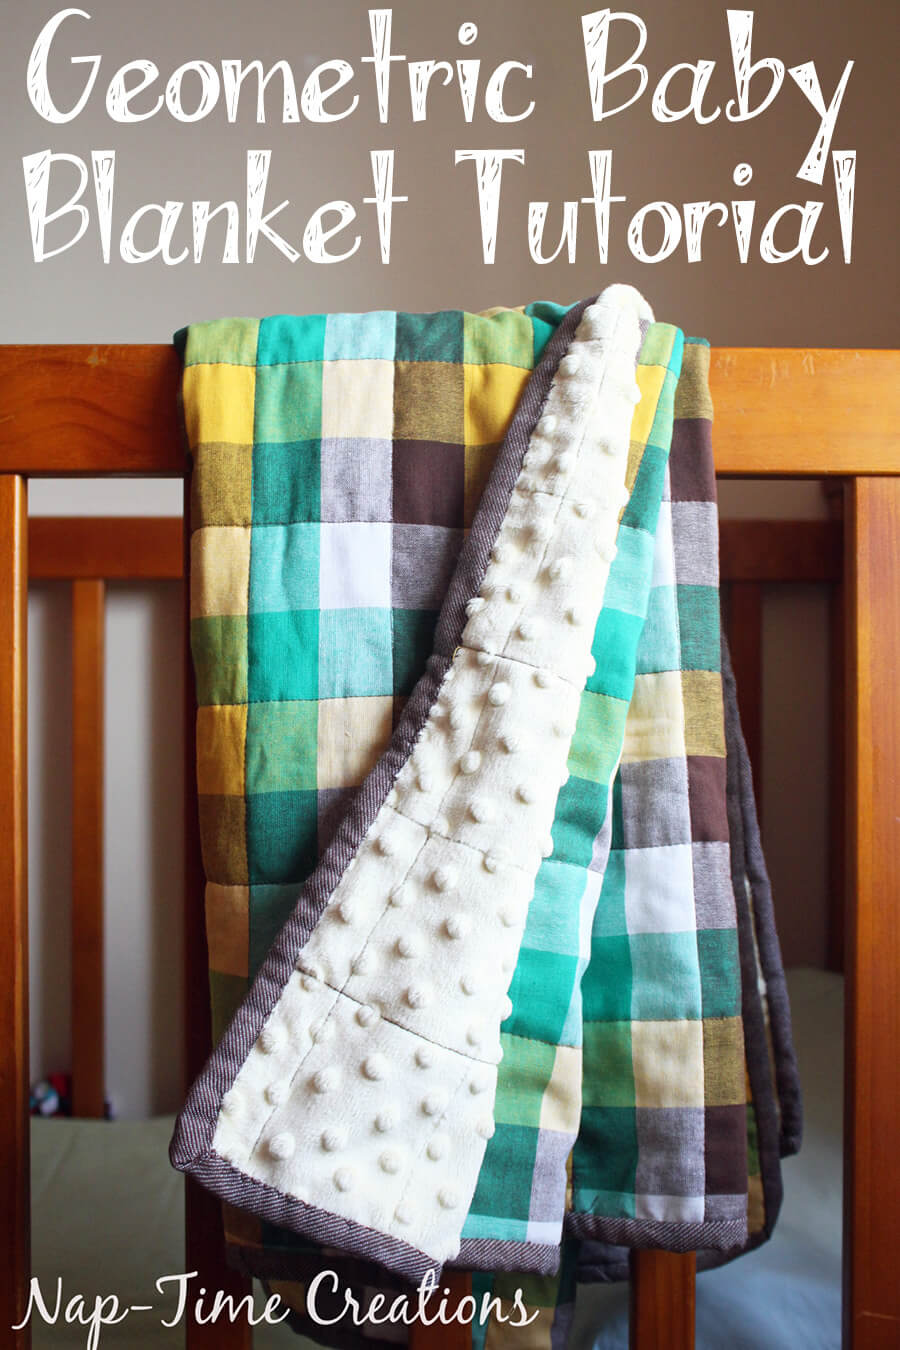 geometic fabric baby blanket tutorial from Nap-Time Creations